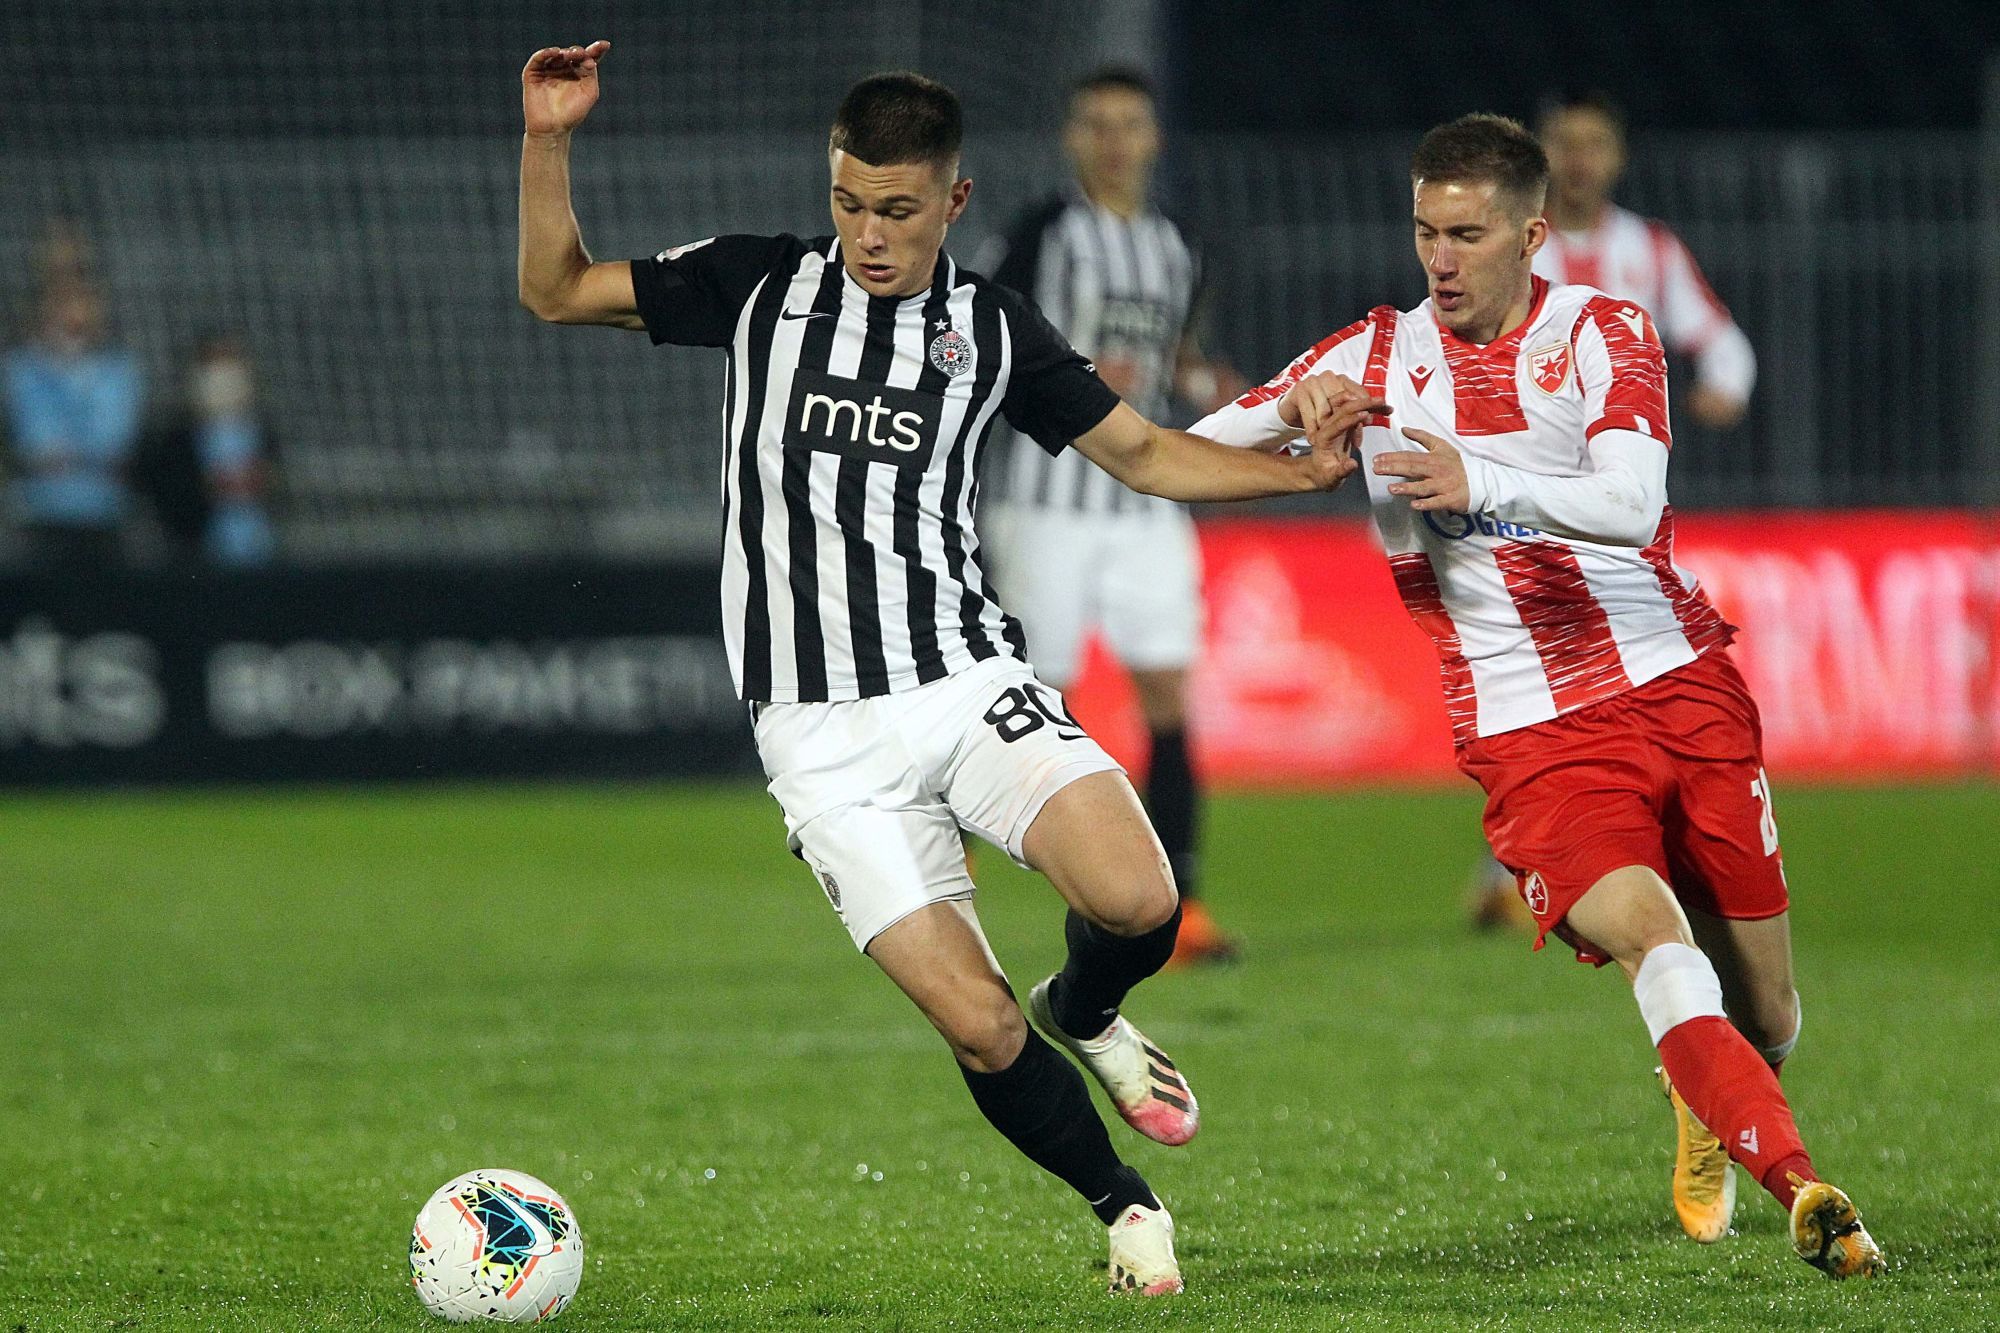 19, October, 2020, Belgrade - The match of the 11th round of the Lingong Super League of Serbia, the 163rd derby between FK Partizan and FK Crvena zvezda, was played at the Partizan stadium. Filip Stevanovic, #80 (FK Partizan, Beograd). Photo: A.K./ATAImages

19, oktobar, 2020, Beograd  - Utakmica 11. kola Lingong Super lige Srbije, 163. derbi izmedju FK Partizan i FK Crvena zvezda odigrana je na stadionu Partizana. Photo: A.K./ATAImages 
By Icon Sport - Stadion FK Partizan - Belgrade (Serbie)